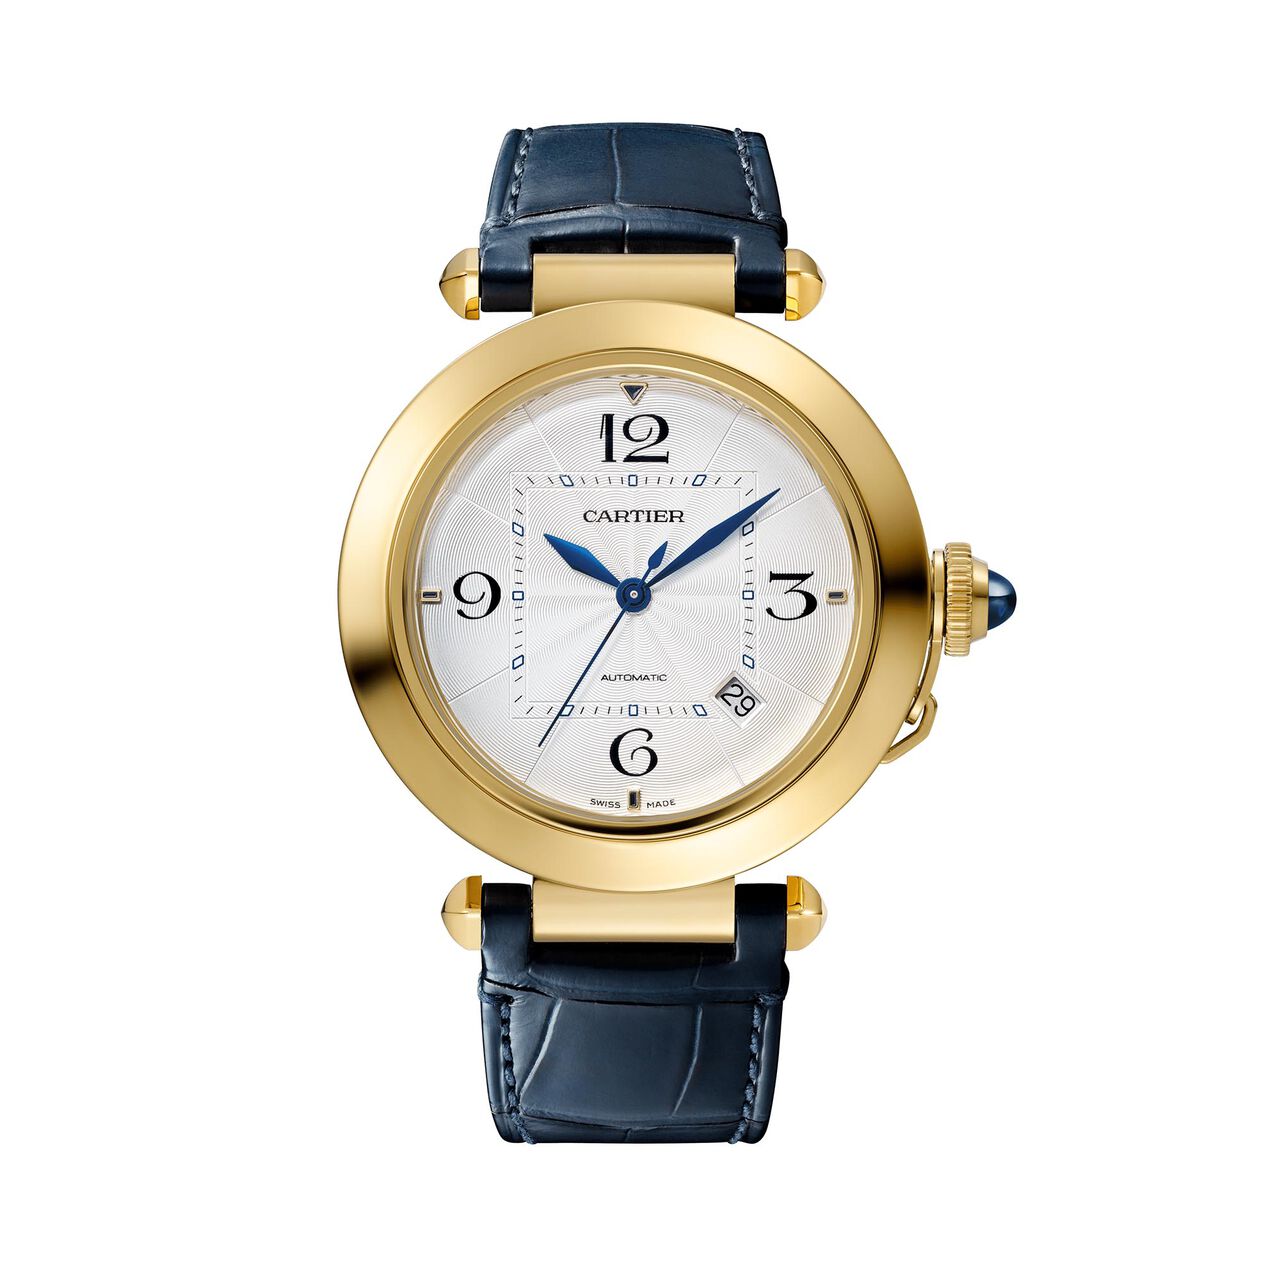 maison birks pasha de cartier watch 41 mm yellow gold two interchangeable straps wgpa0007 image number 0